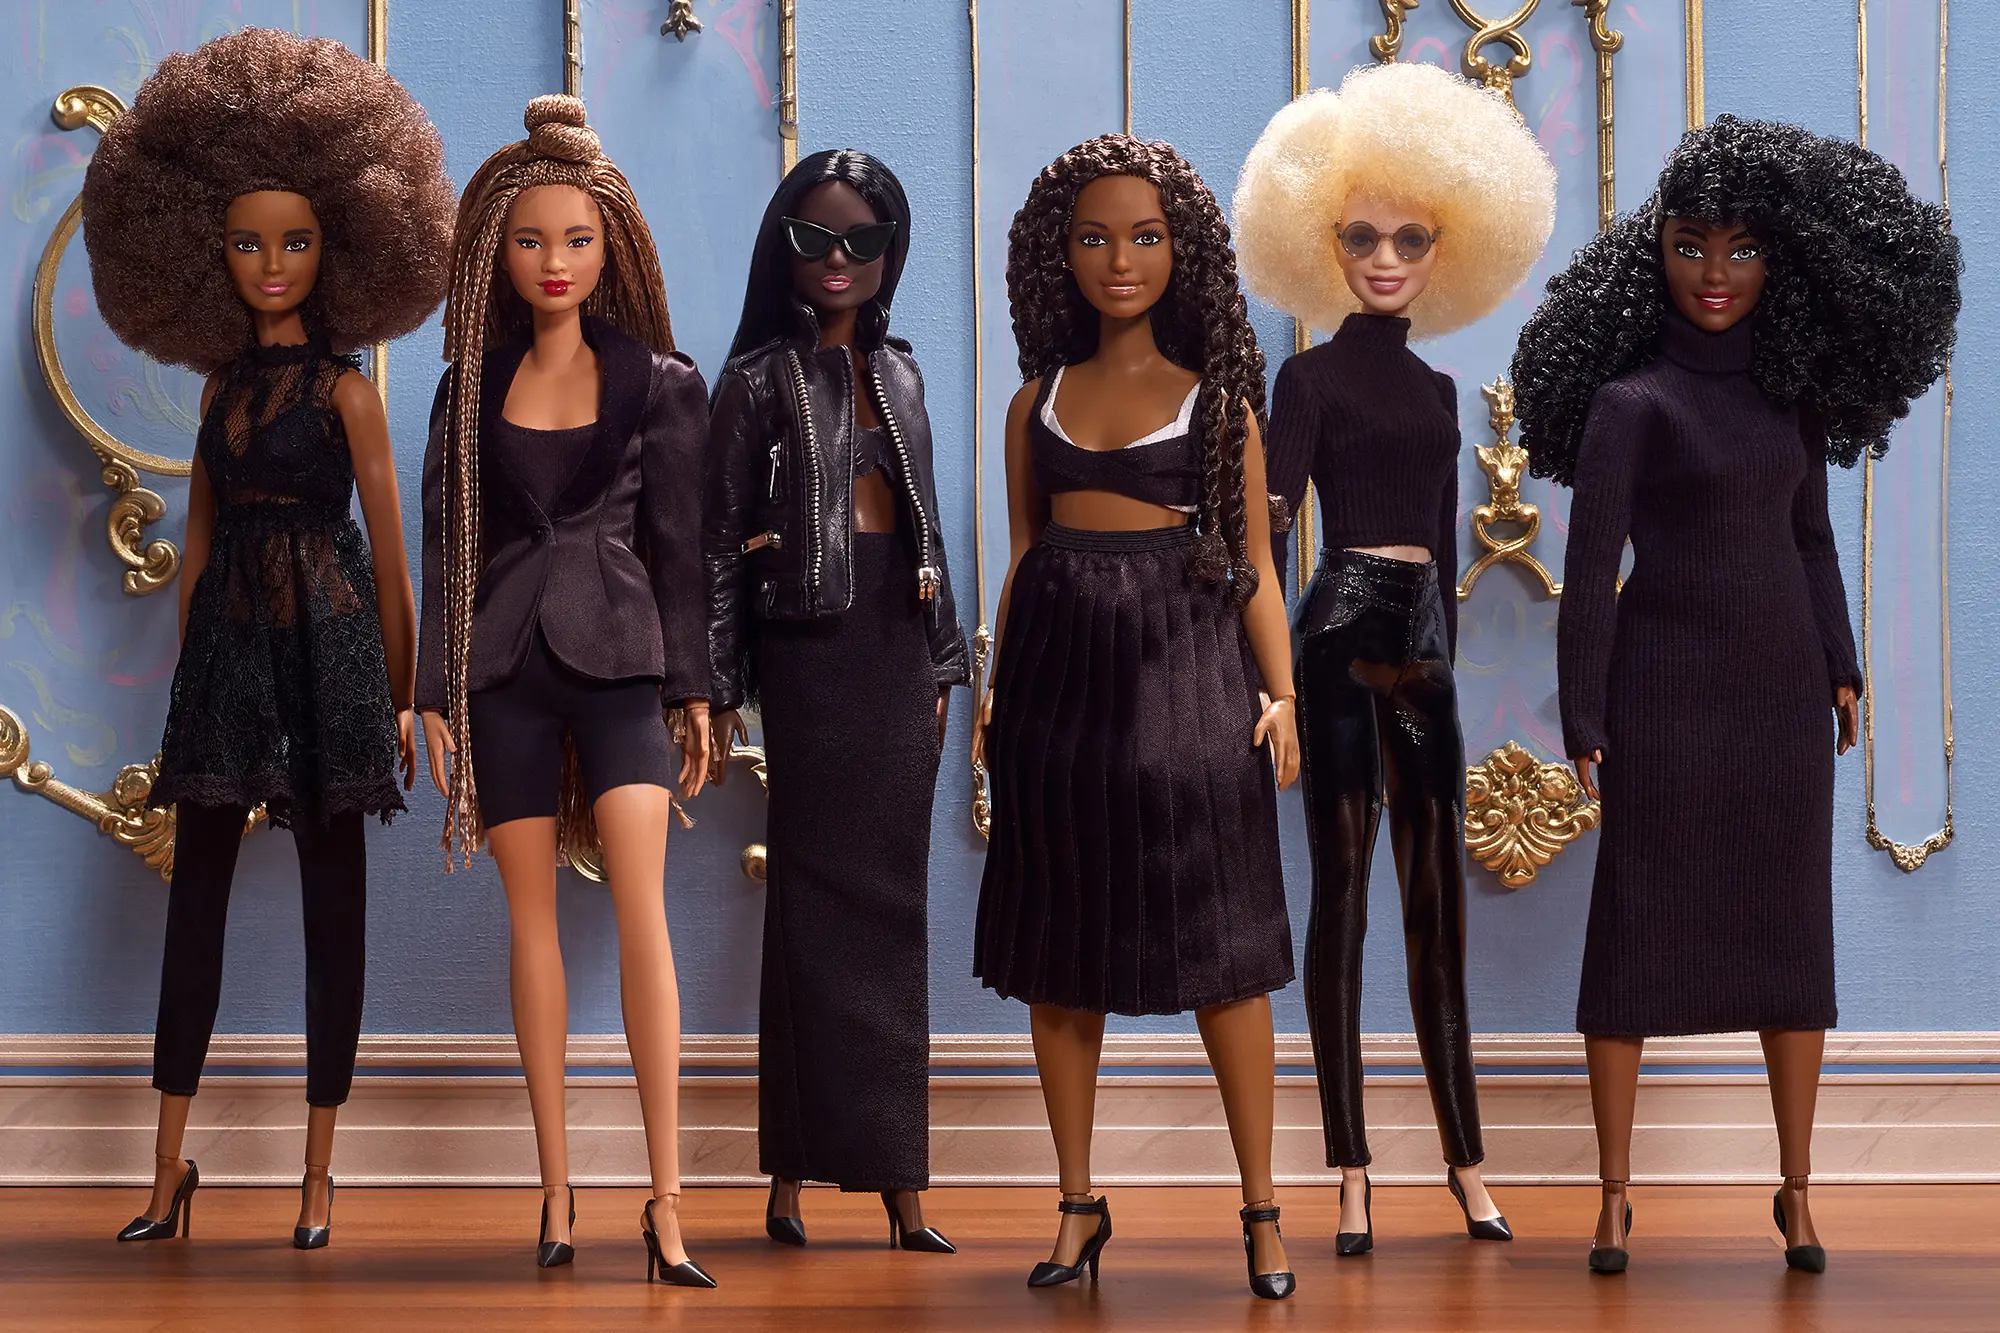 Nextflix documentary tells all about the first Black Barbie